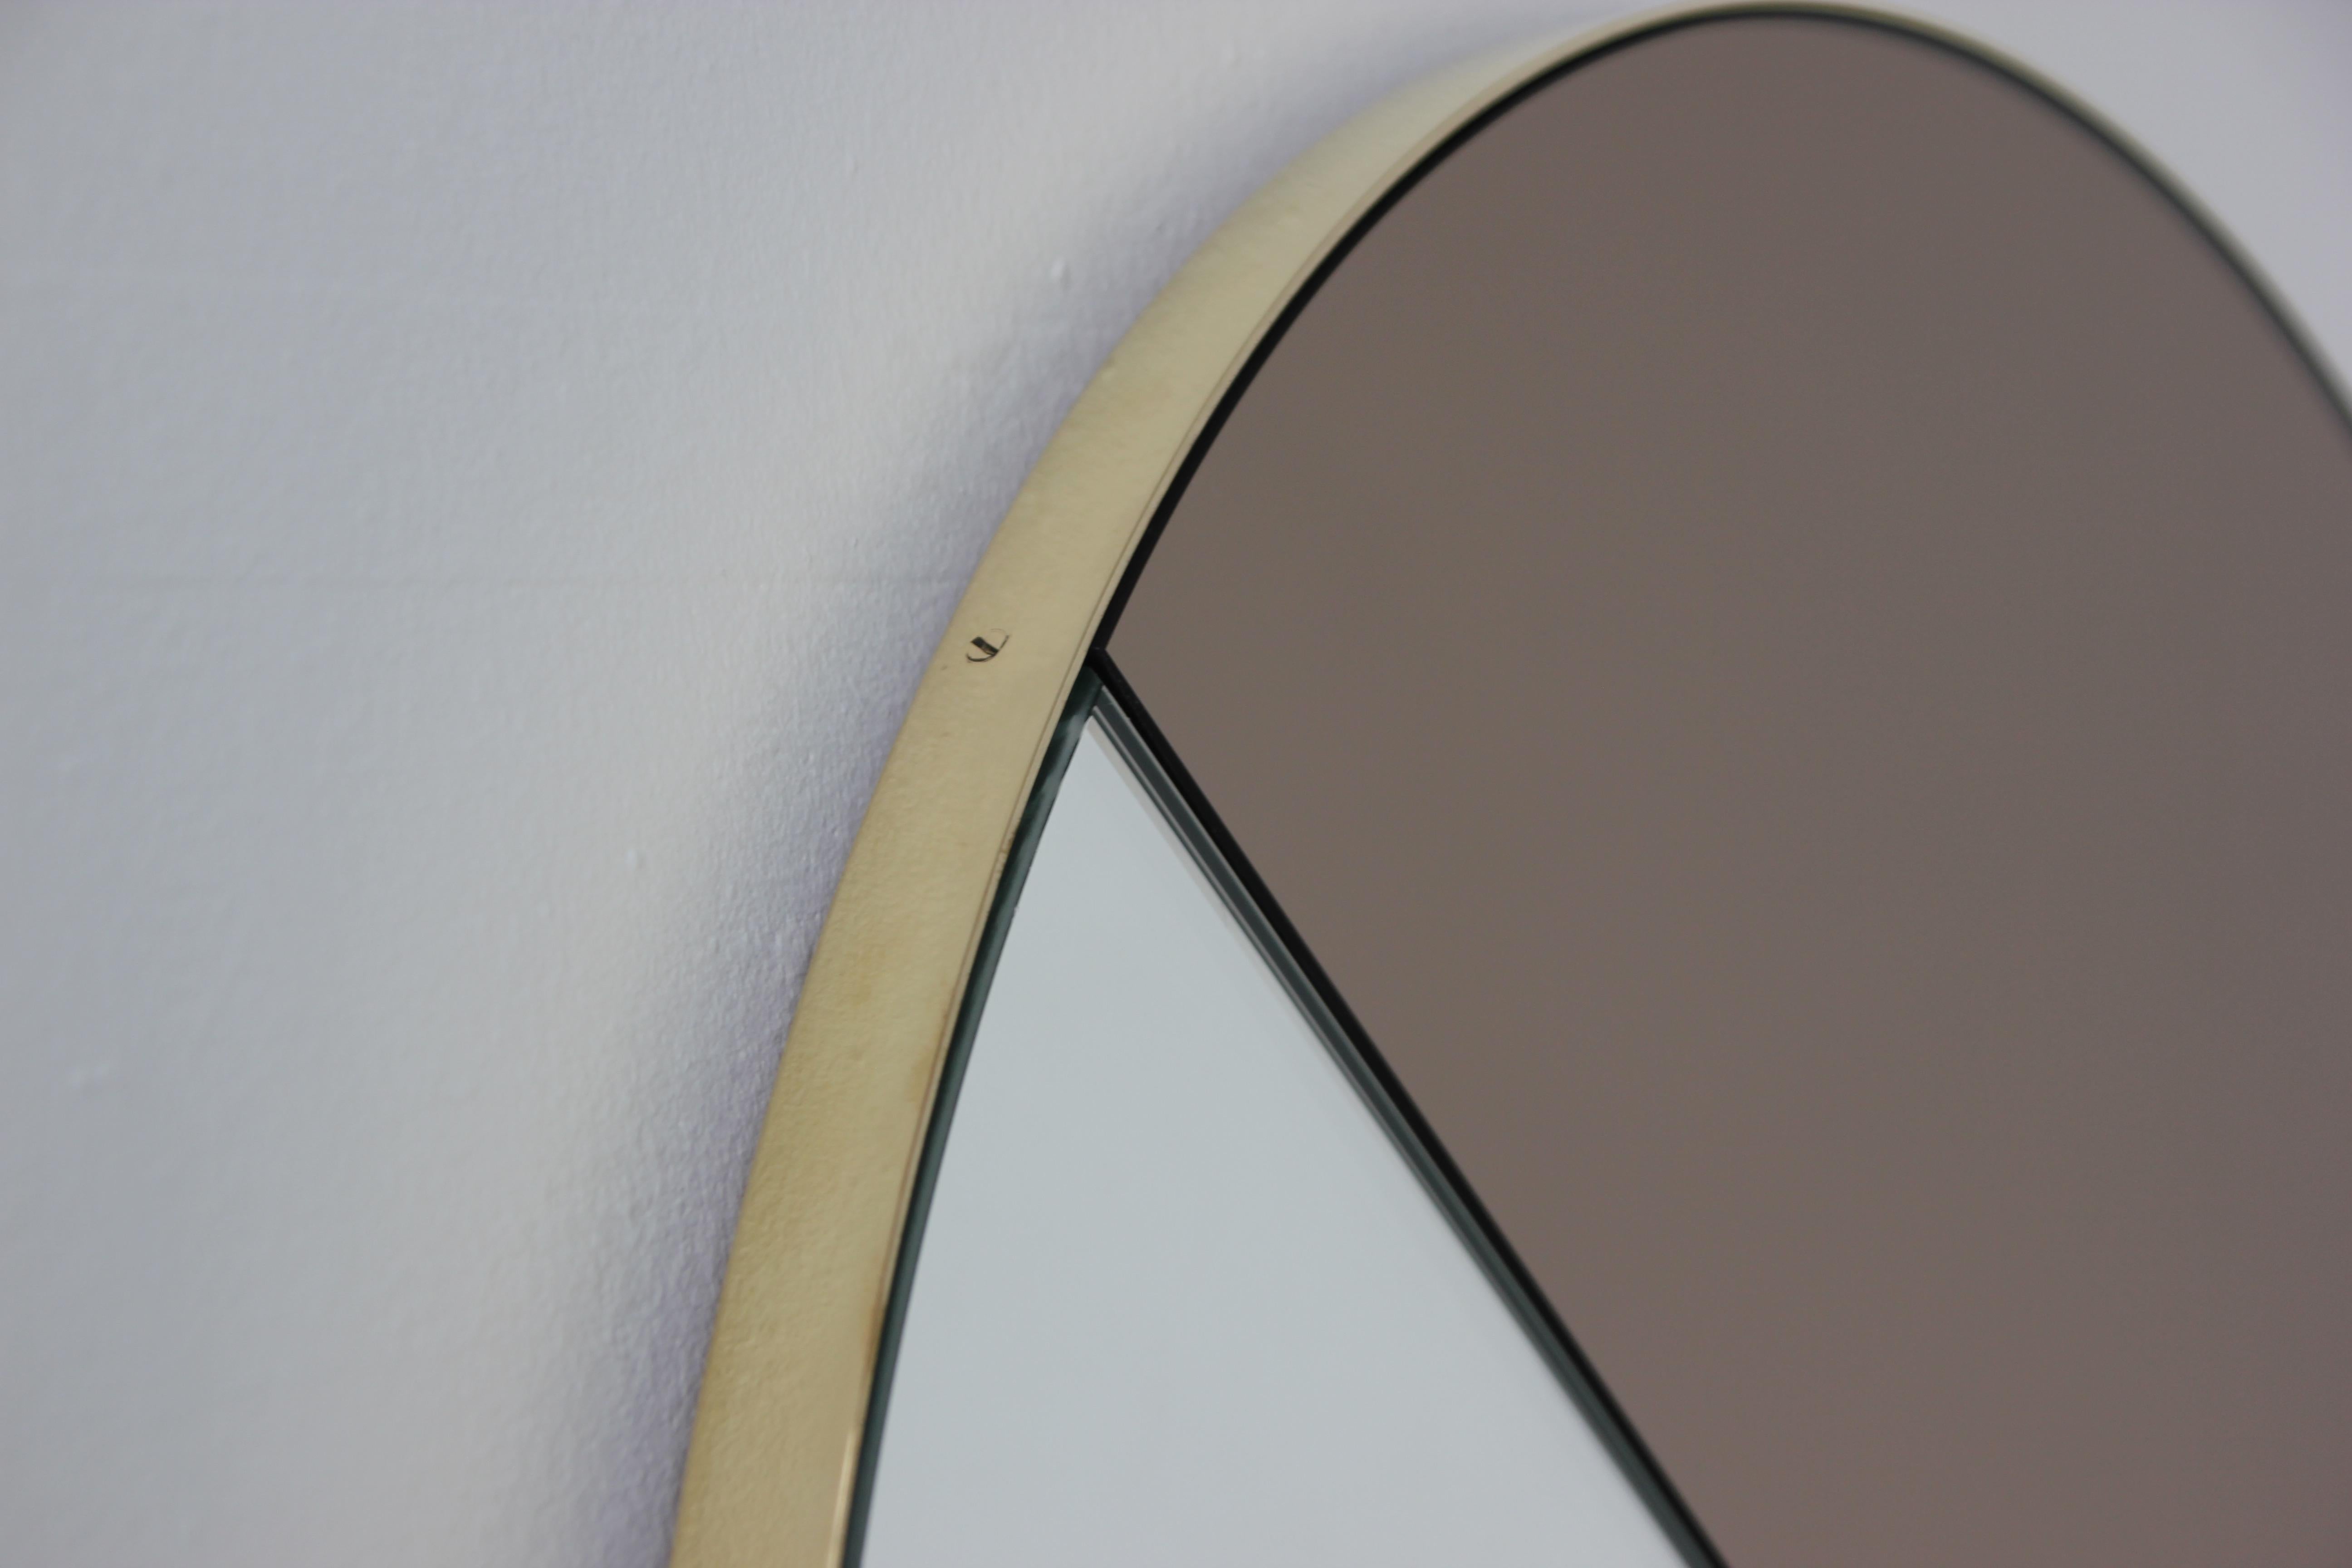 Contemporary mixed tinted bronze and silver Orbis Dualis™ mirror with an elegant solid brushed brass frame.  Designed and handcrafted in London, UK.

All mirrors are fitted with an ingenious French cleat (split batten) system so they may hang flush